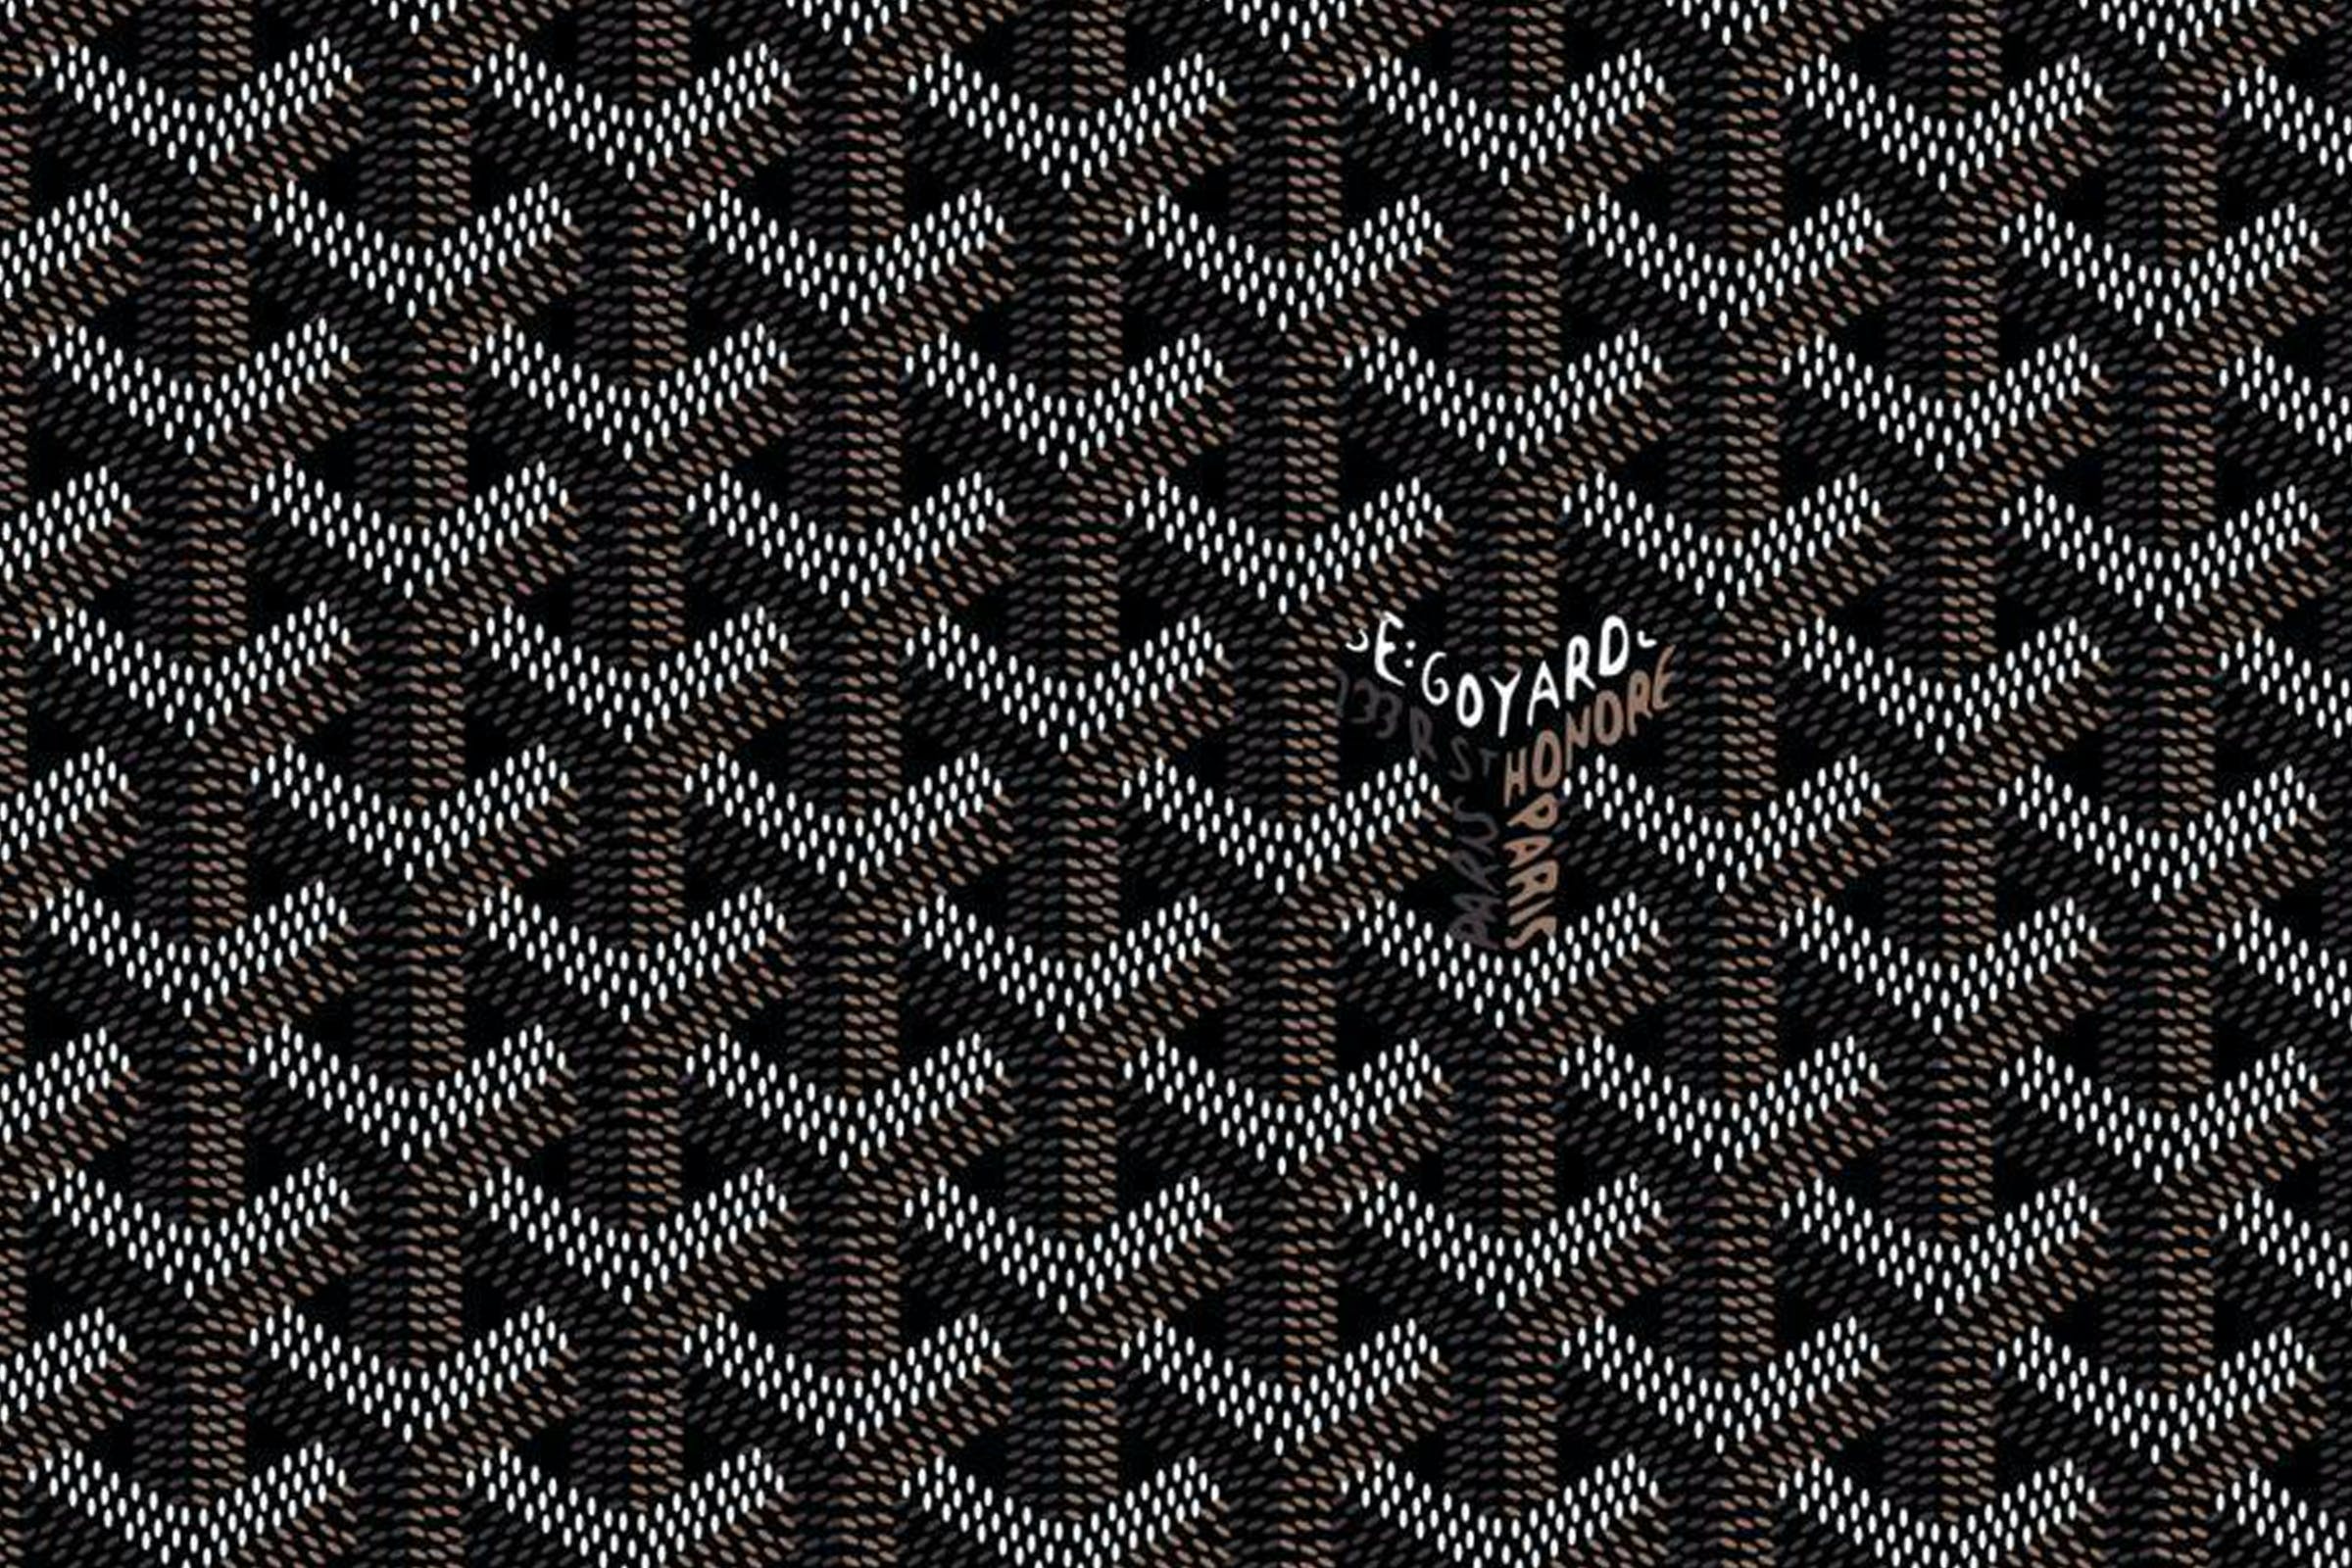 THE STORY OF GOYARD AND IT'S ICONIC BAGS